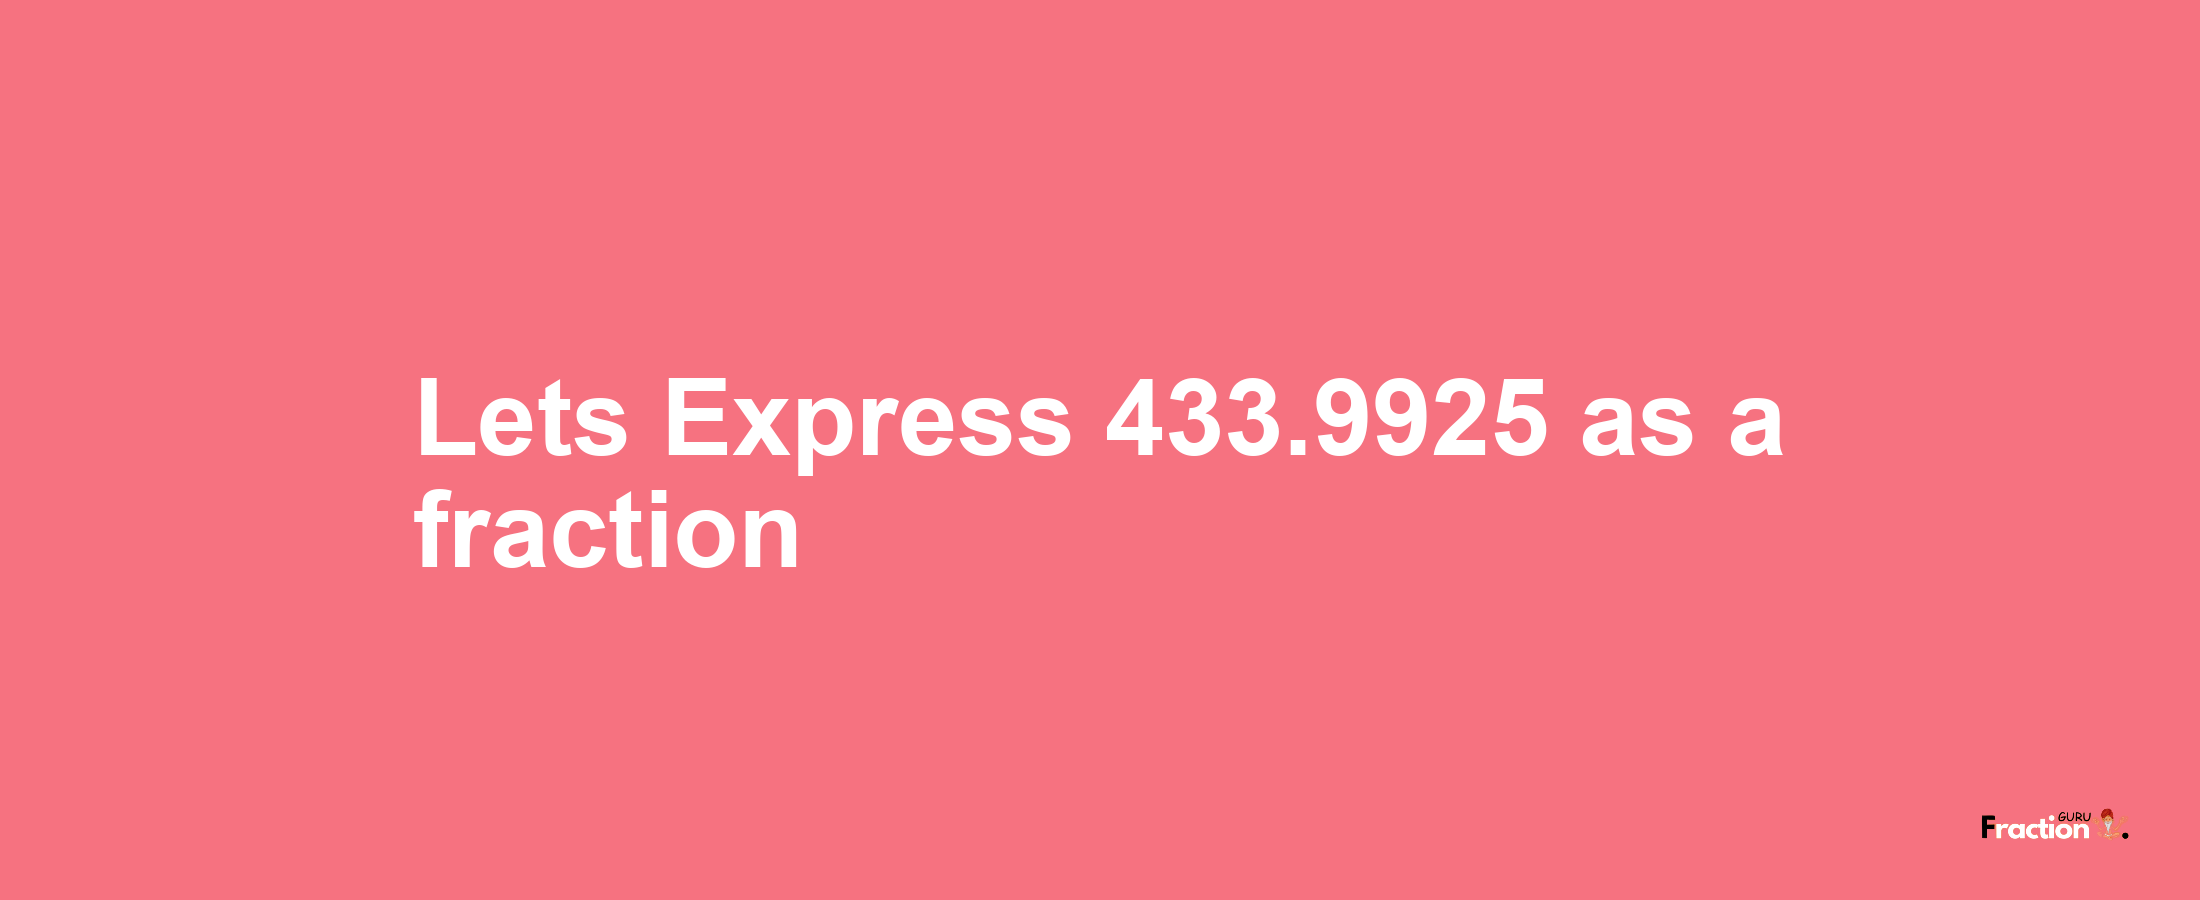 Lets Express 433.9925 as afraction